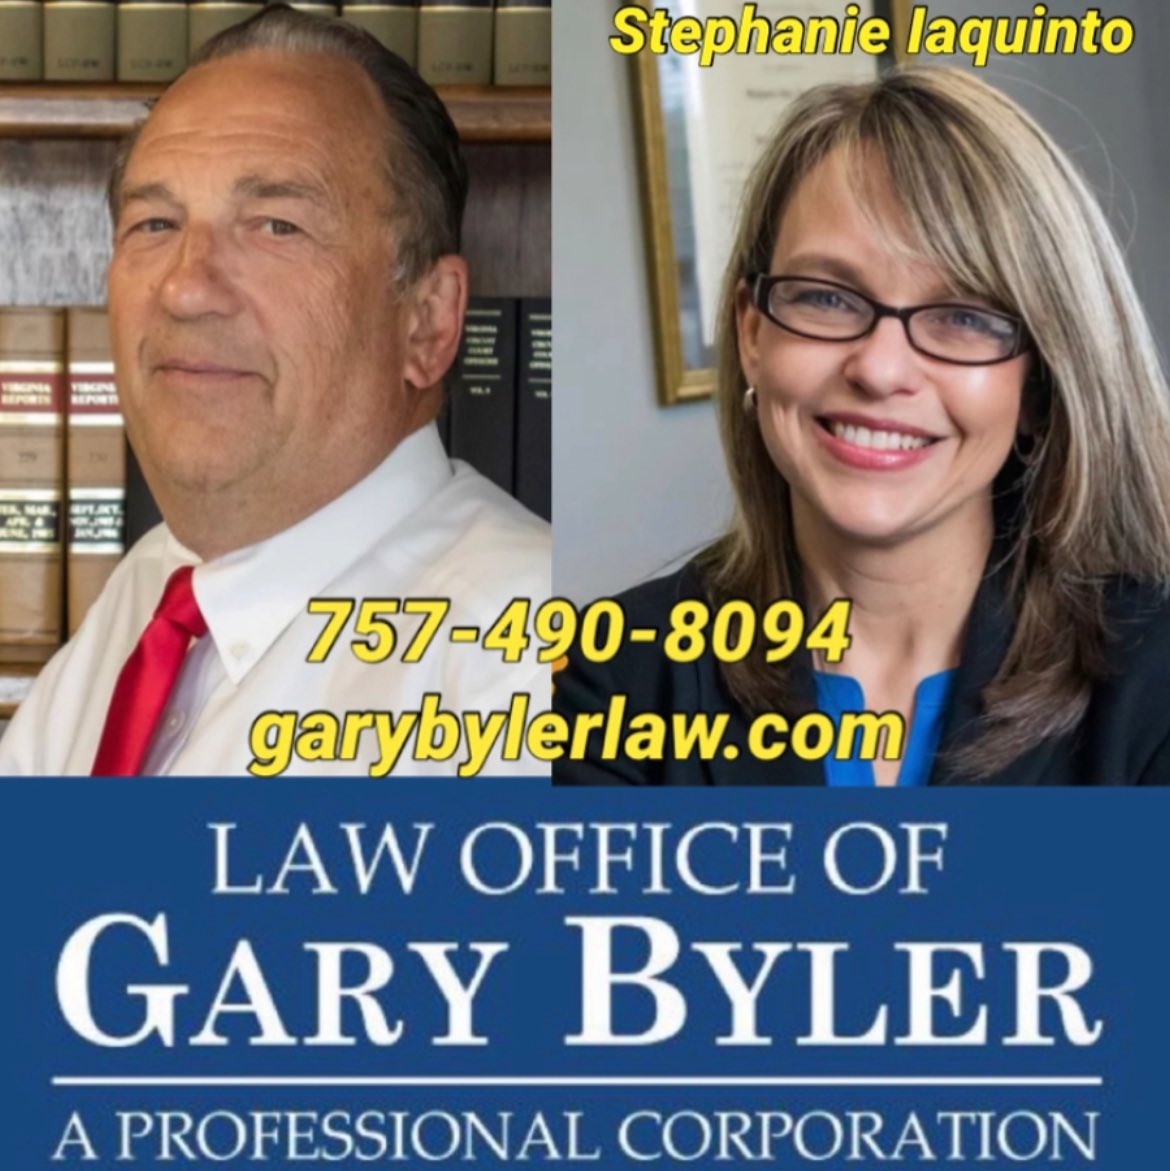 #TT Terrific Tuesday - When you need the very best attorneys, call the very best attorneys: Gary C Byler and Stephanie Iaquinto! Top-notch legal geniuses and marvelous human beings! 757-490-8094 garybylerlaw.com